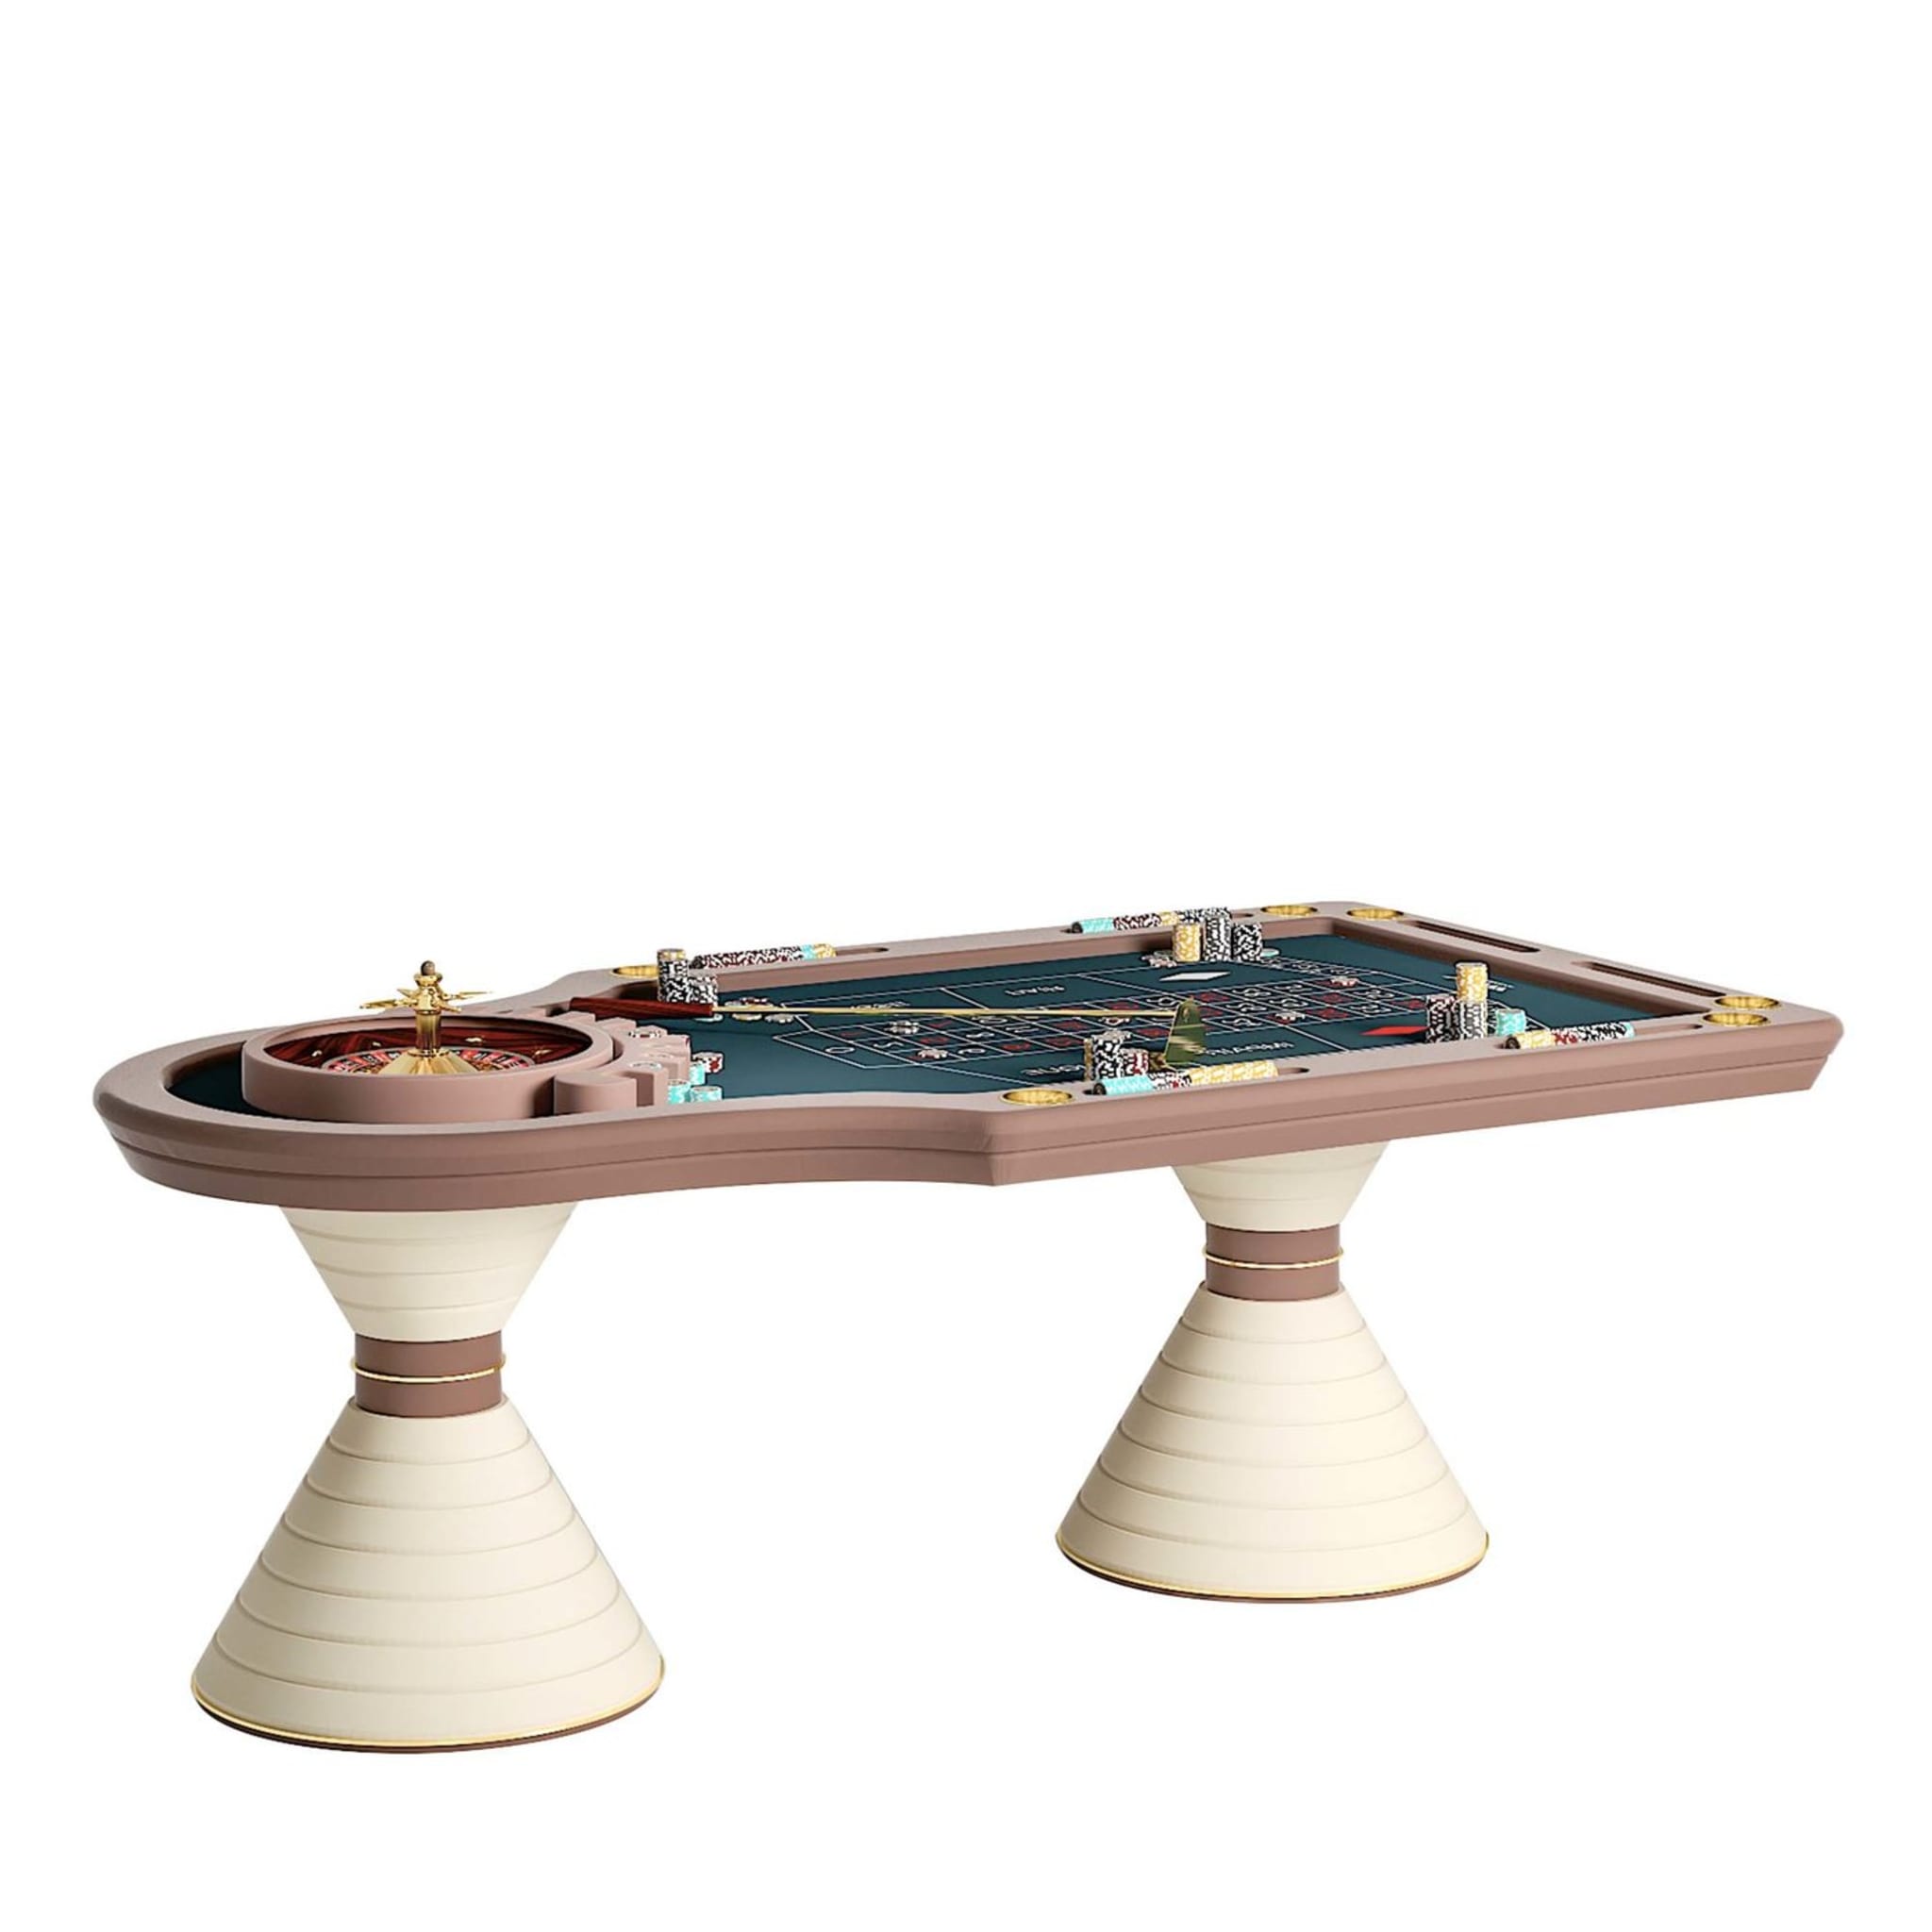 Roulette table by Pino Vismara - Main view